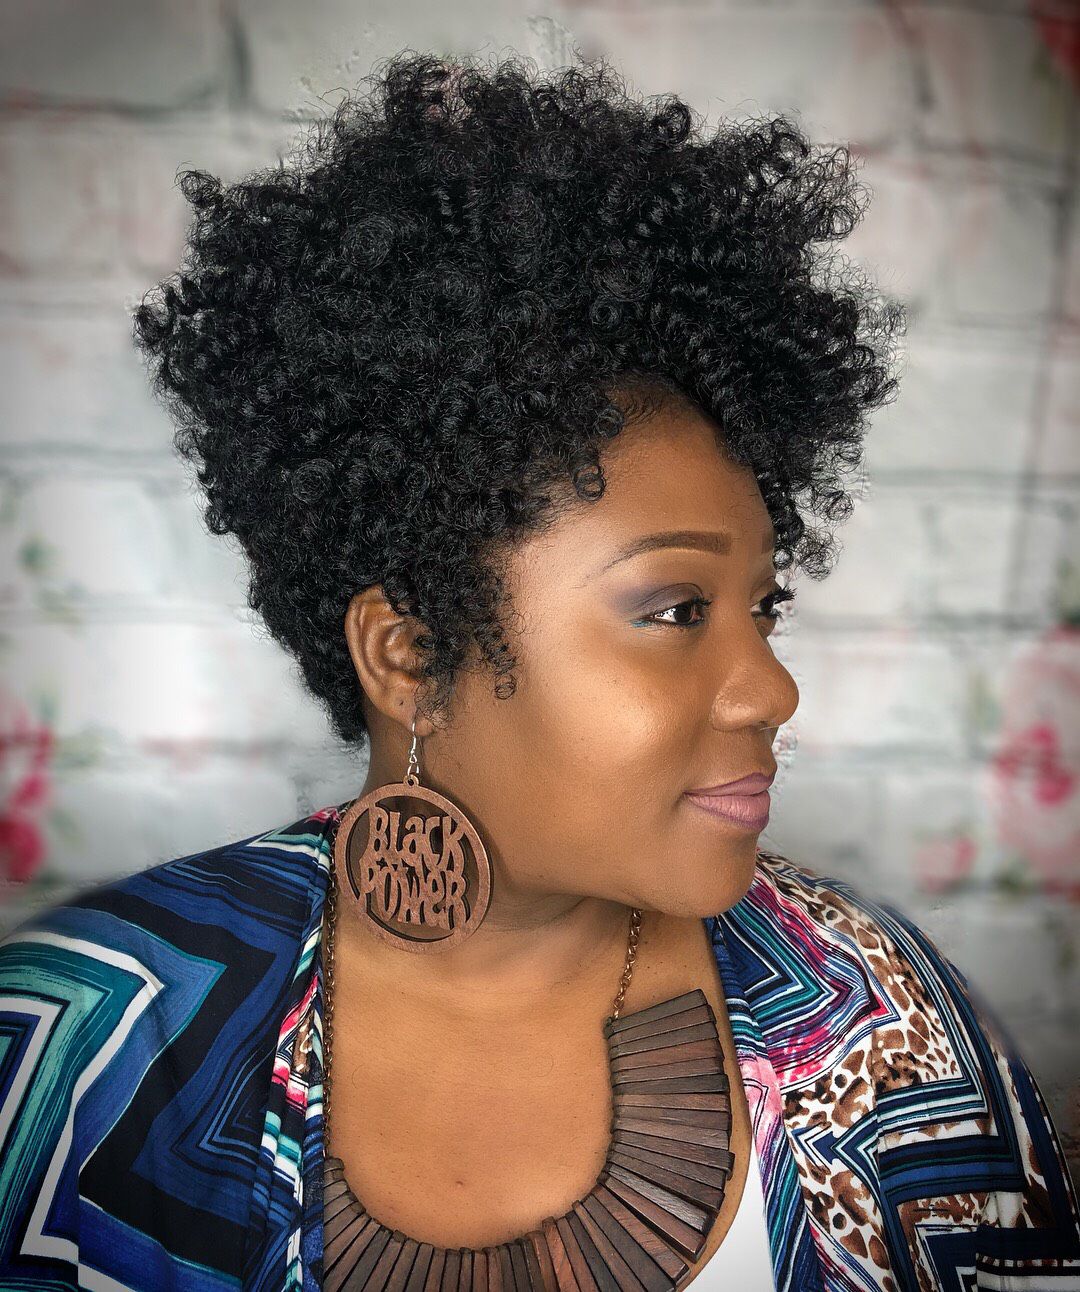 55+ Best Short Hairstyles for Black Women - Natural and Relaxed